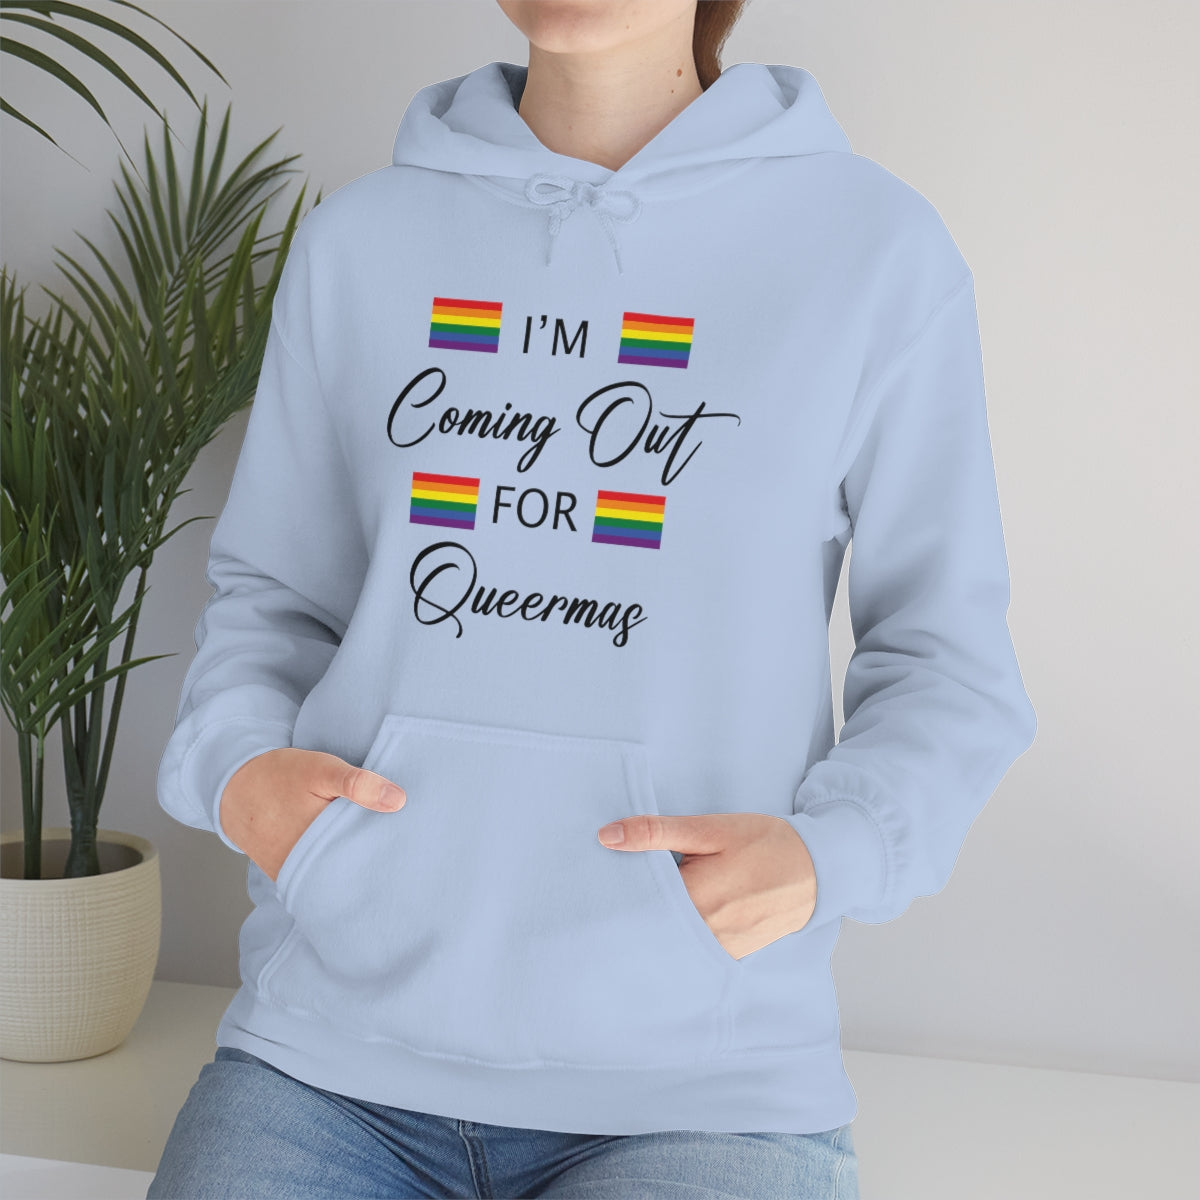 Unisex Christmas LGBTQ Heavy Blend Hoodie - I’M Coming Out For Queermas Printify